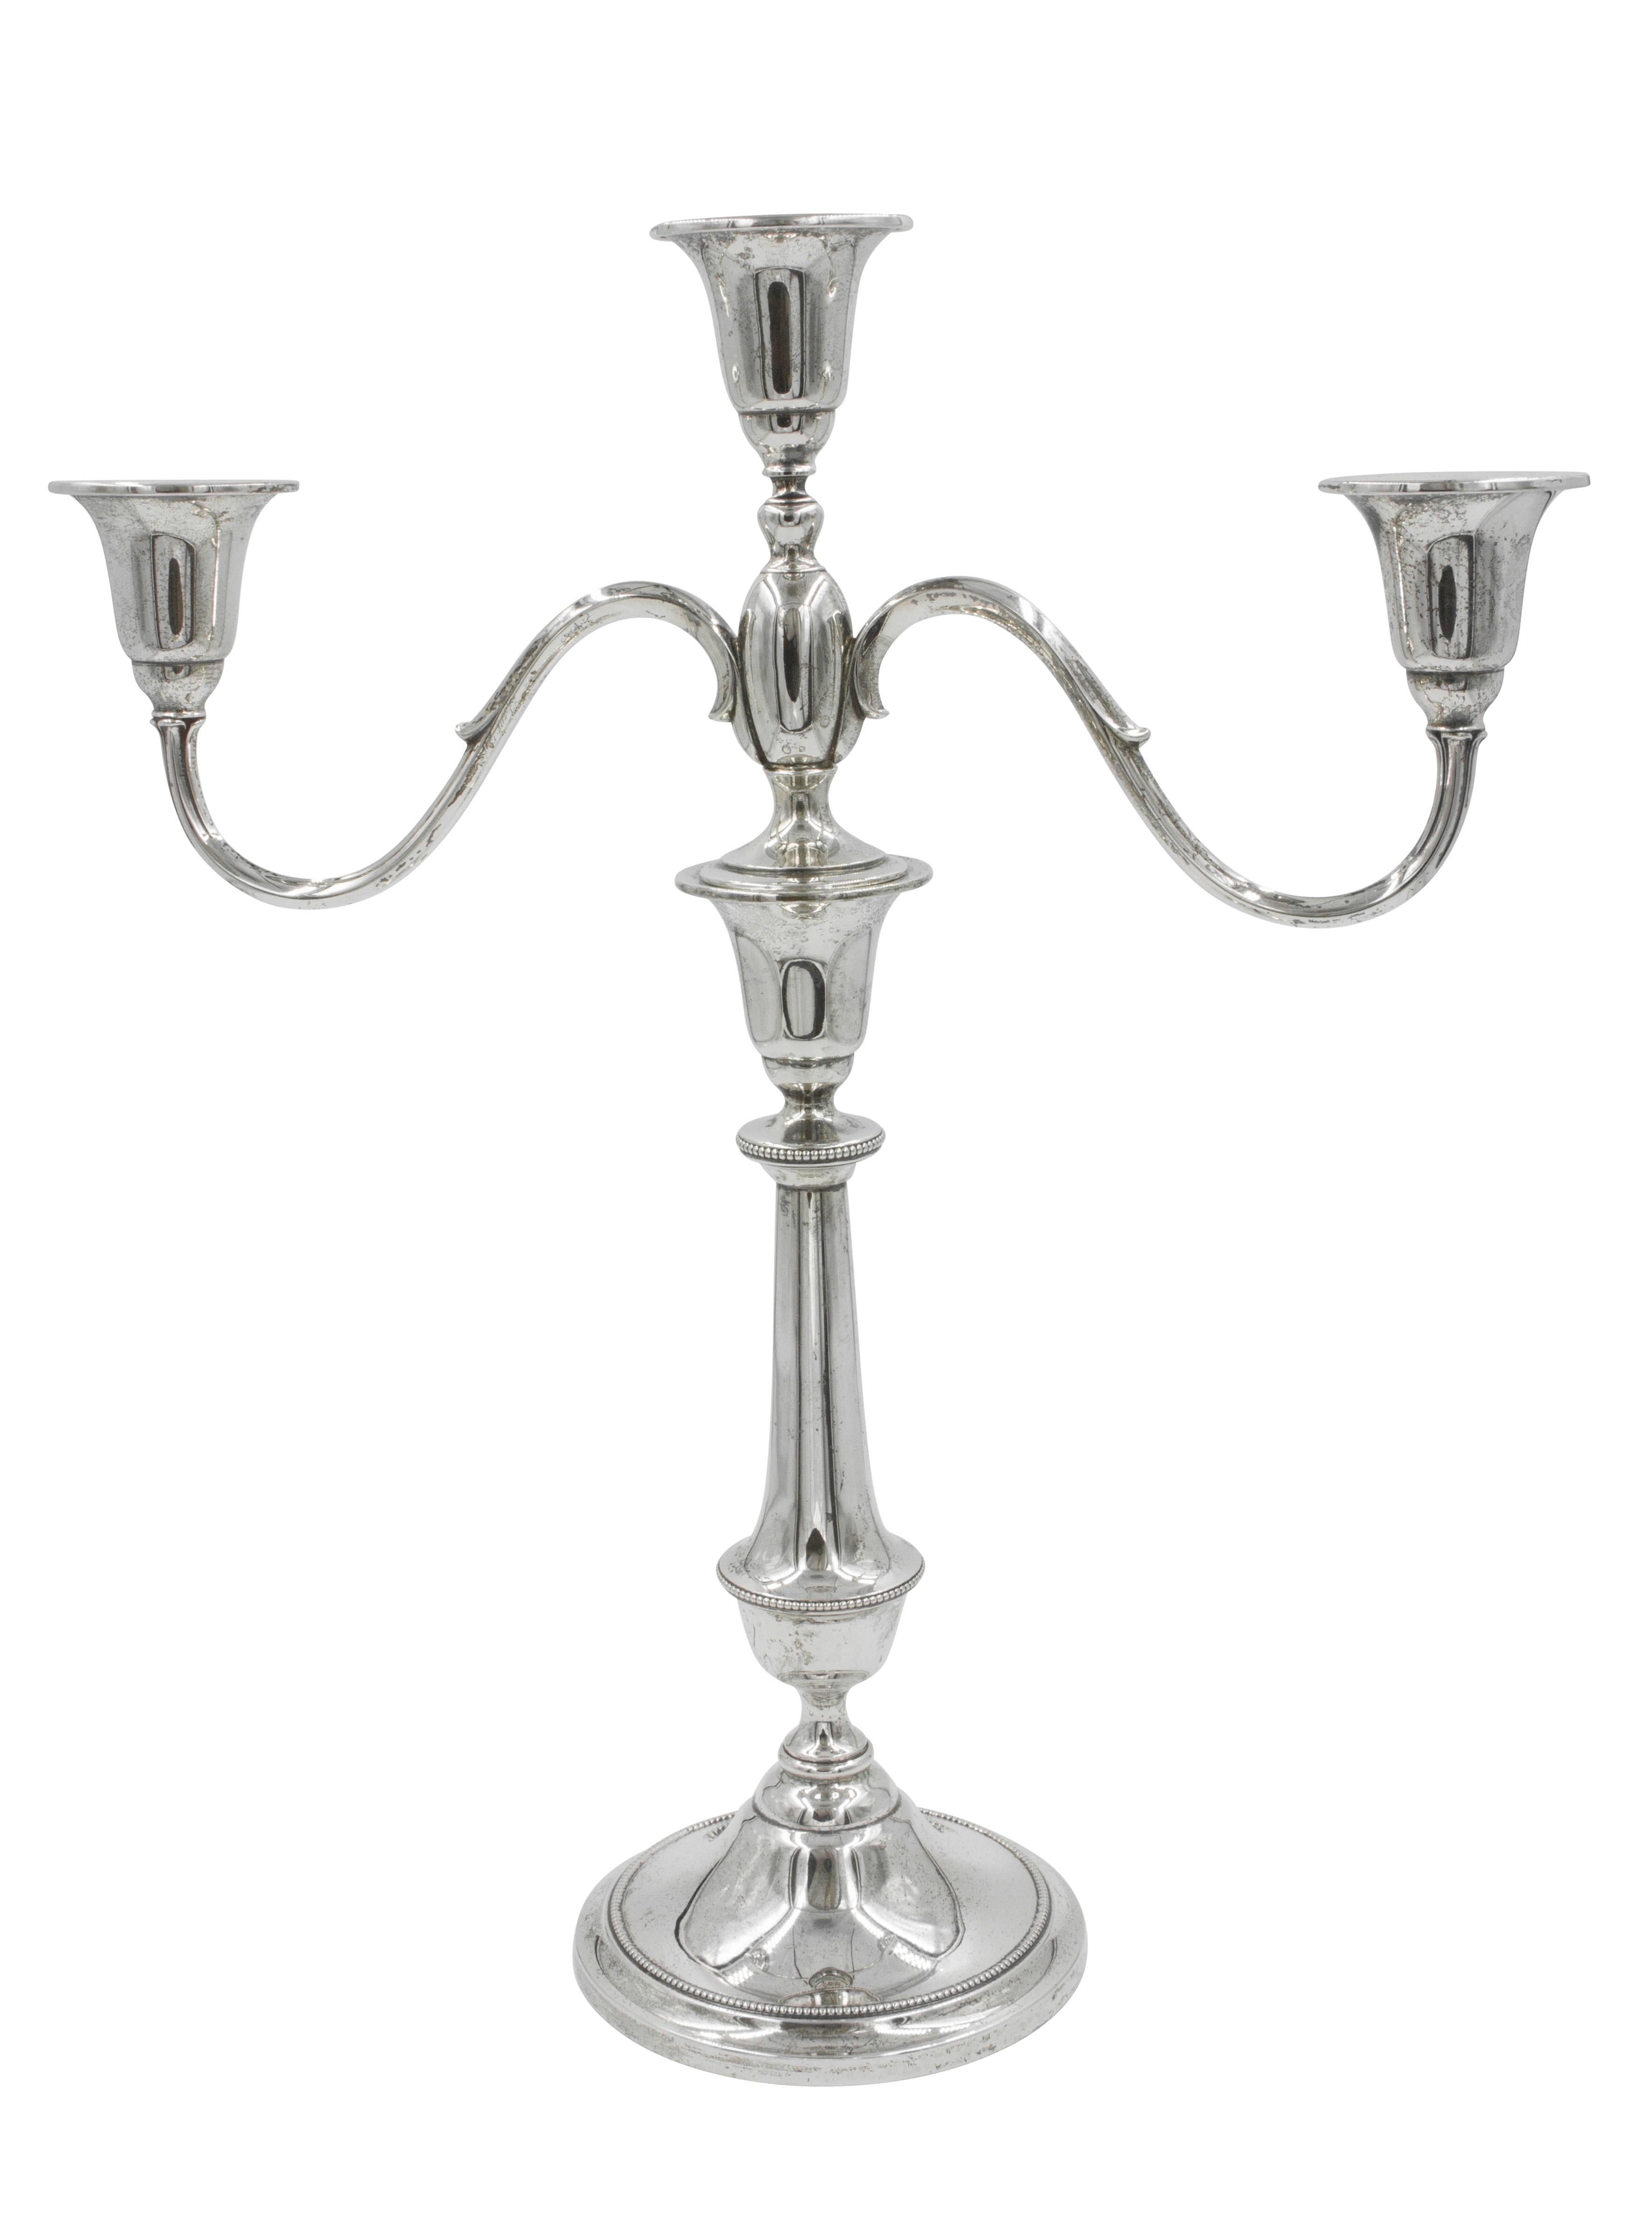 There is a certain elegance that can't always be put into words, is it their feminine shape or their sophisticated style? Maybe both? These candelabras would look splendid on a dinner table and/or the mantel in a living room. The top part unscrews